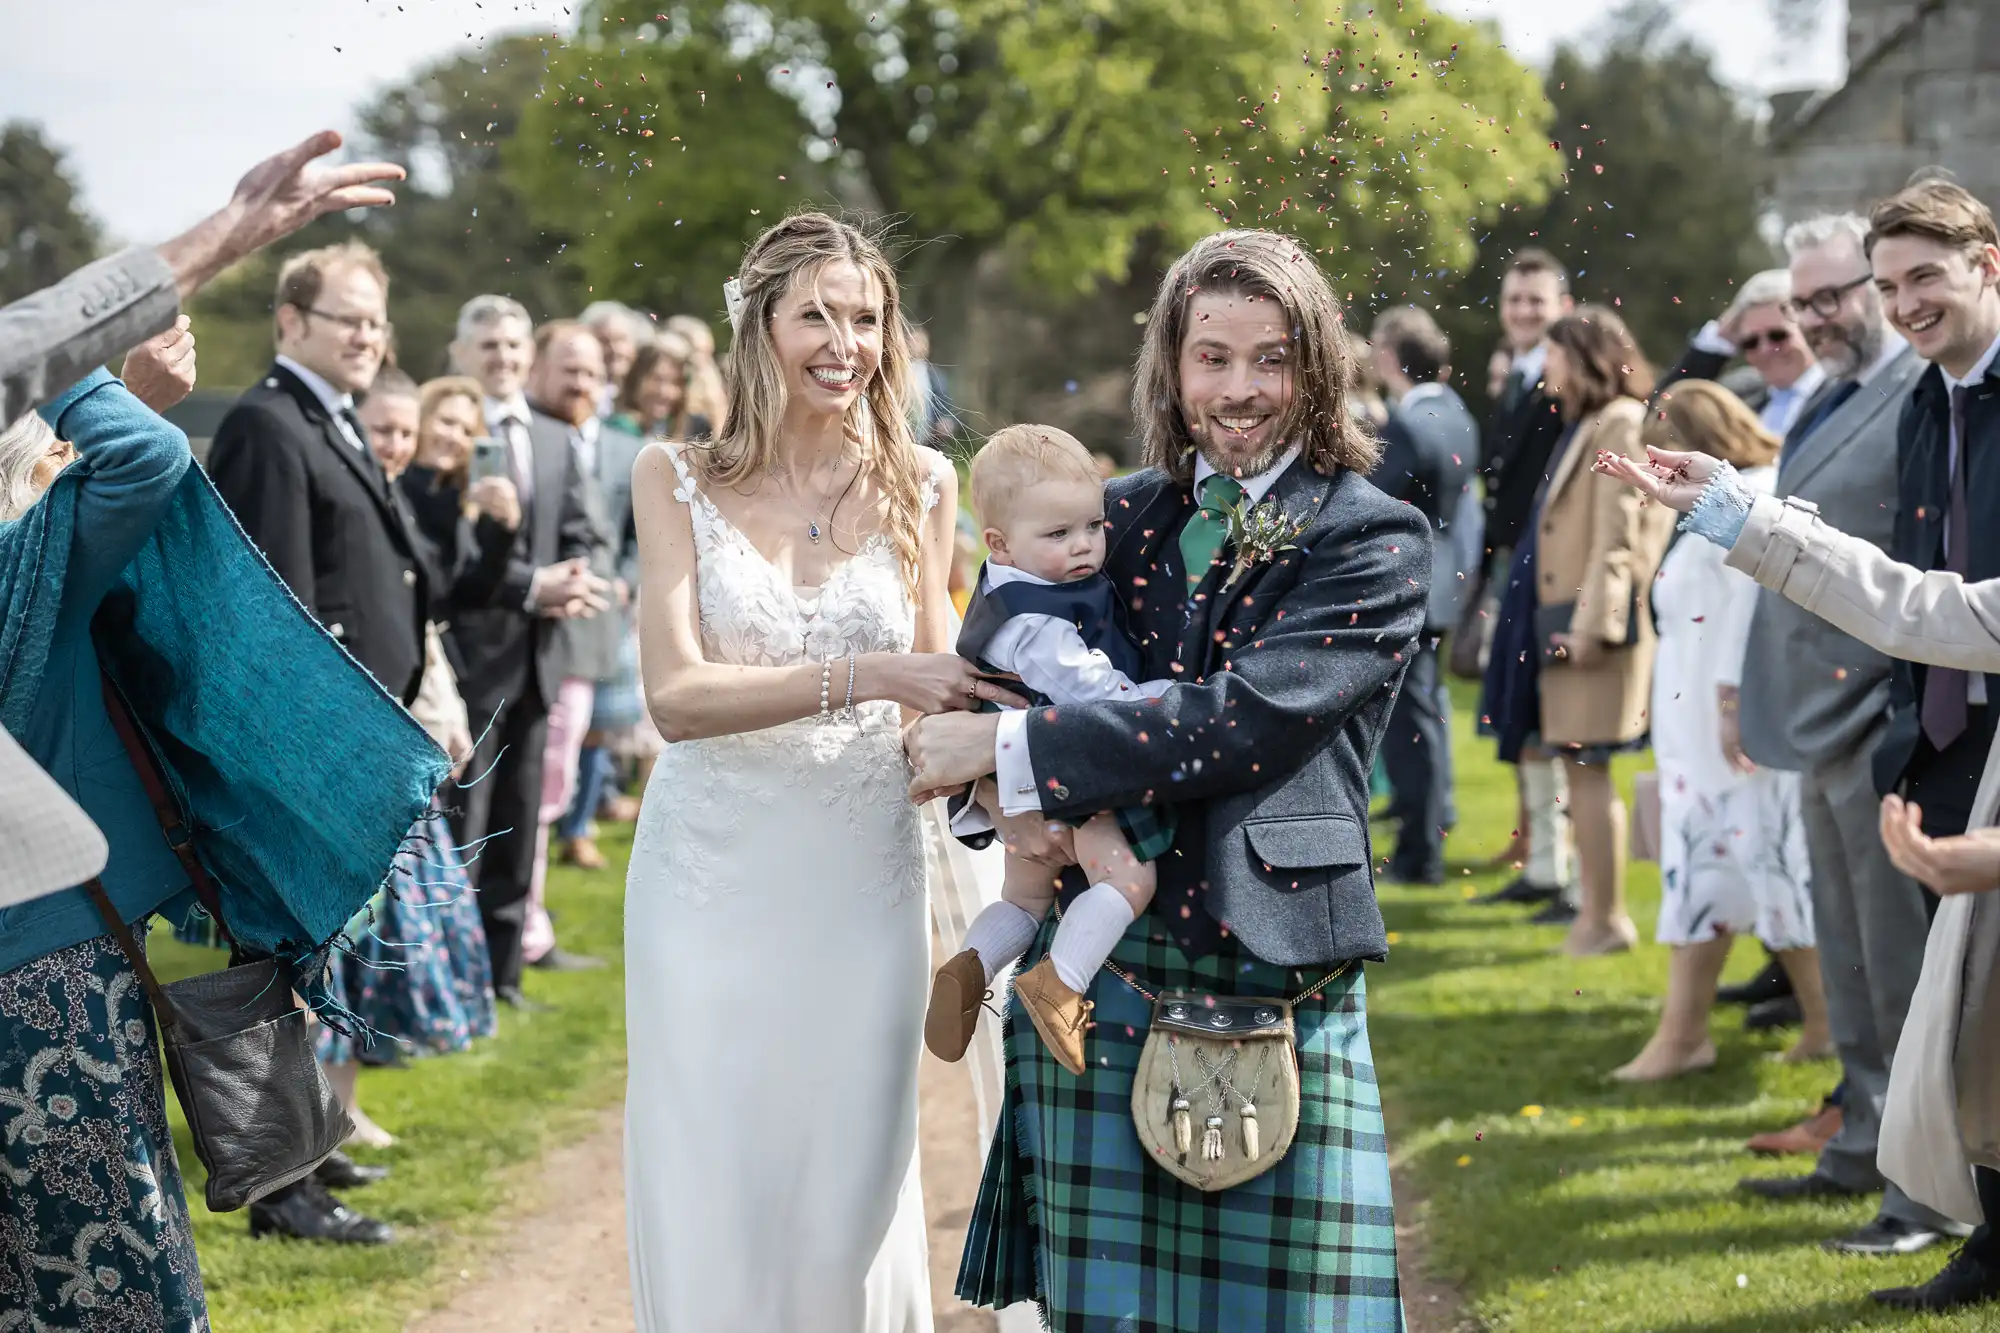 A bride and groom, holding a baby, walk down an outdoor aisle while guests celebrate by throwing confetti. The groom is wearing a kilt, and the bride is in a white gown.